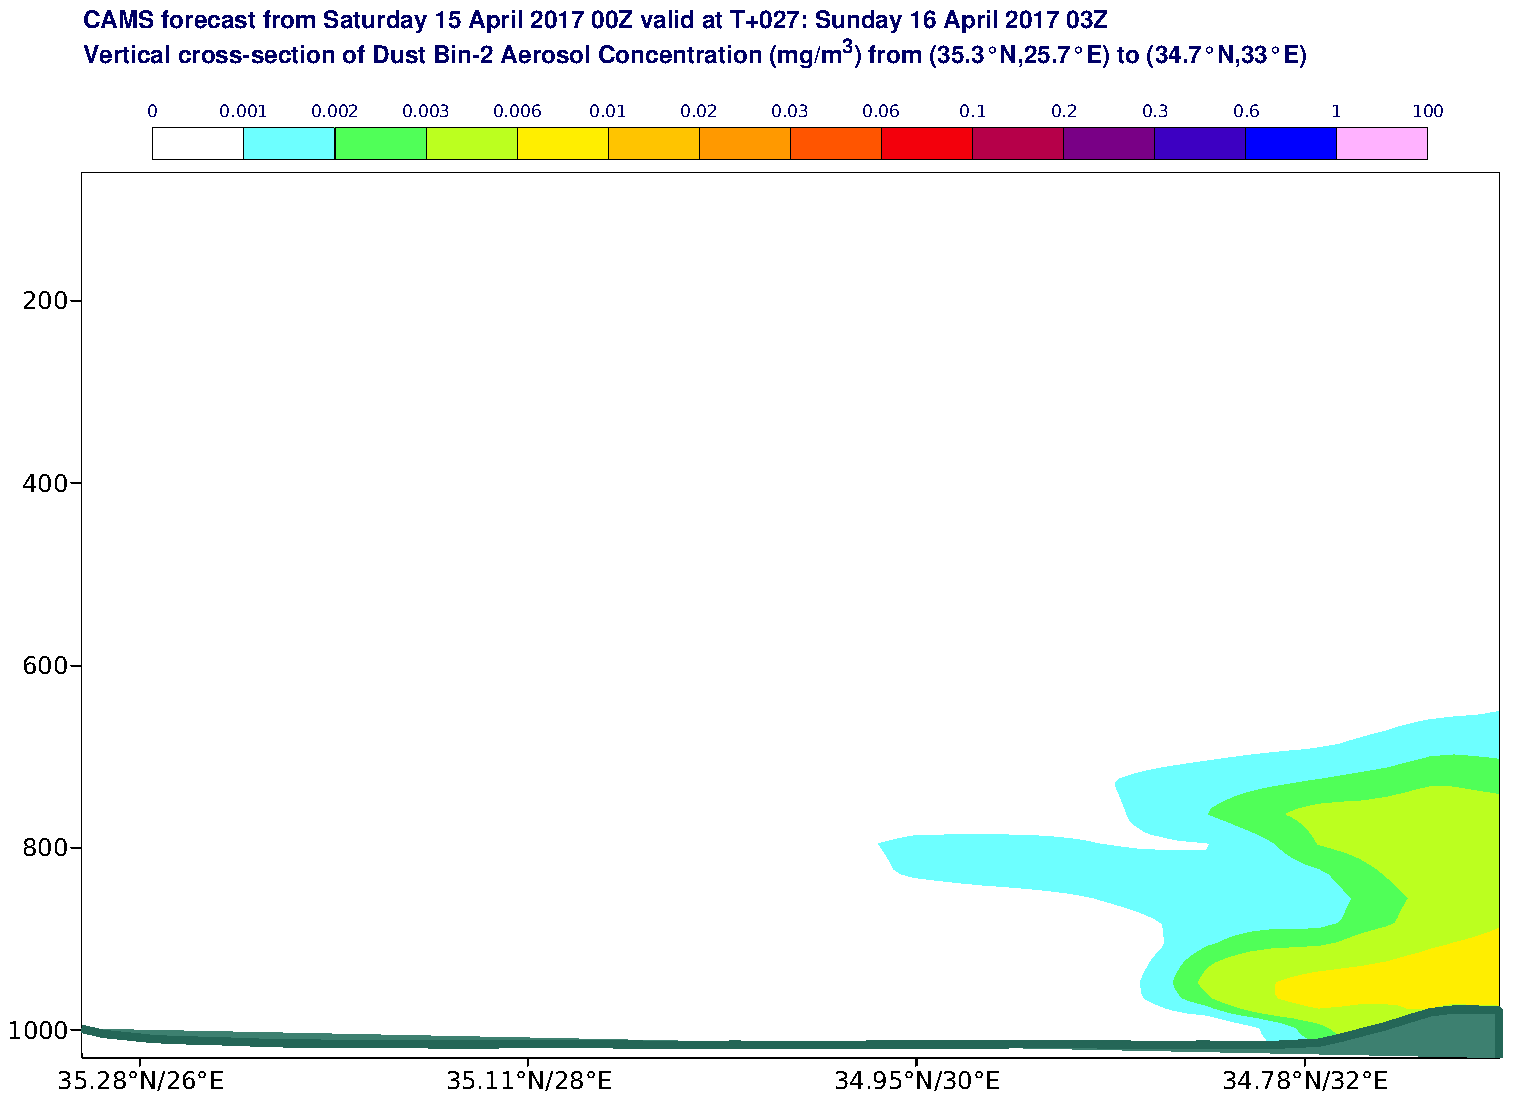 Vertical cross-section of Dust Bin-2 Aerosol Concentration (mg/m3) valid at T27 - 2017-04-16 03:00